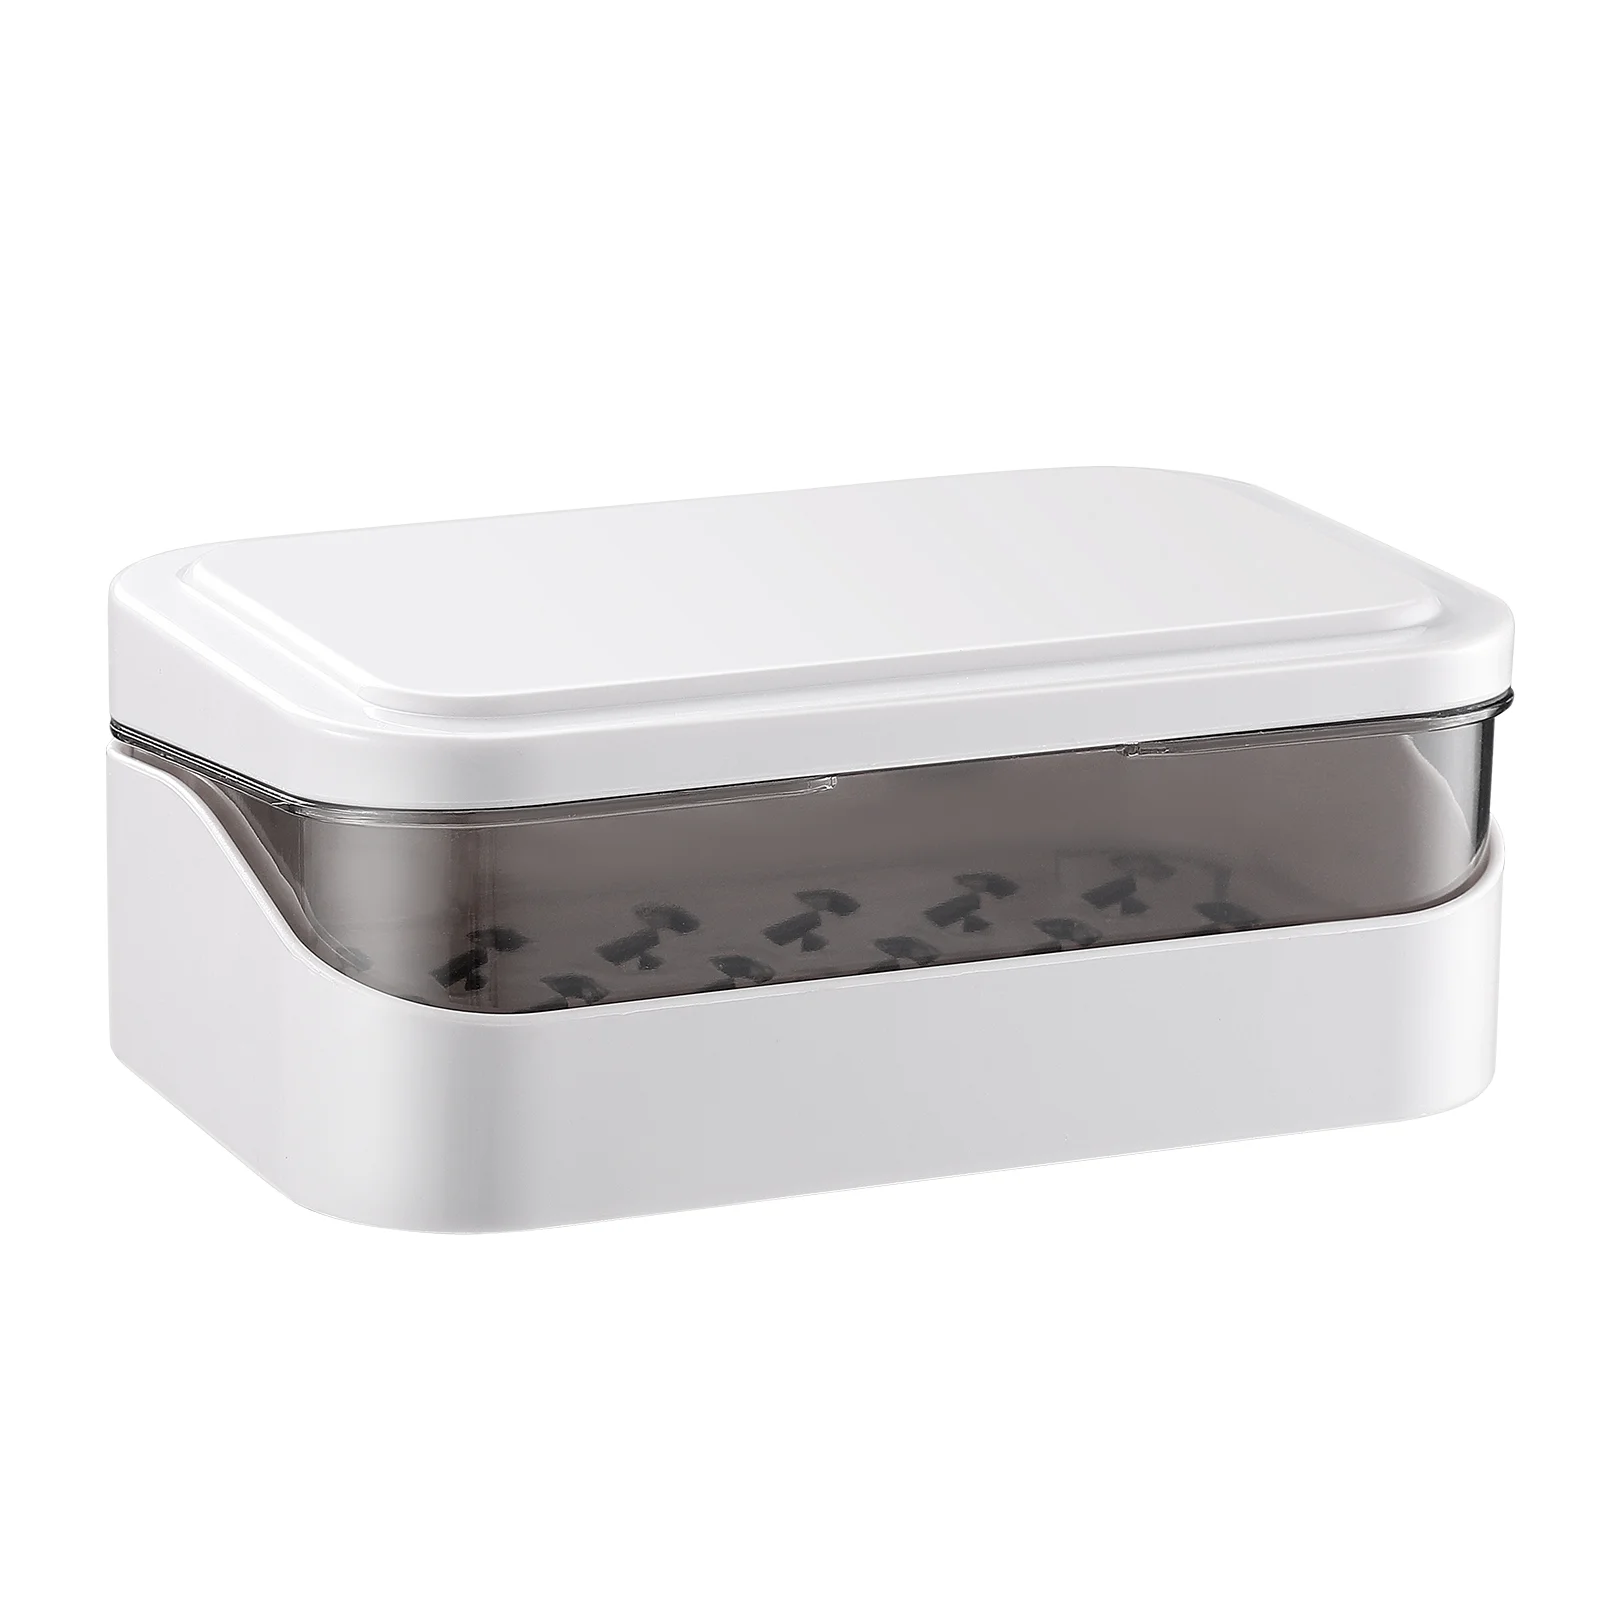 

Soap Travel Holder Case Barcontainer Box Dishlid Dishes Drain Shower Draining Bathroom Portable Storage White Cover Rackbag Tray